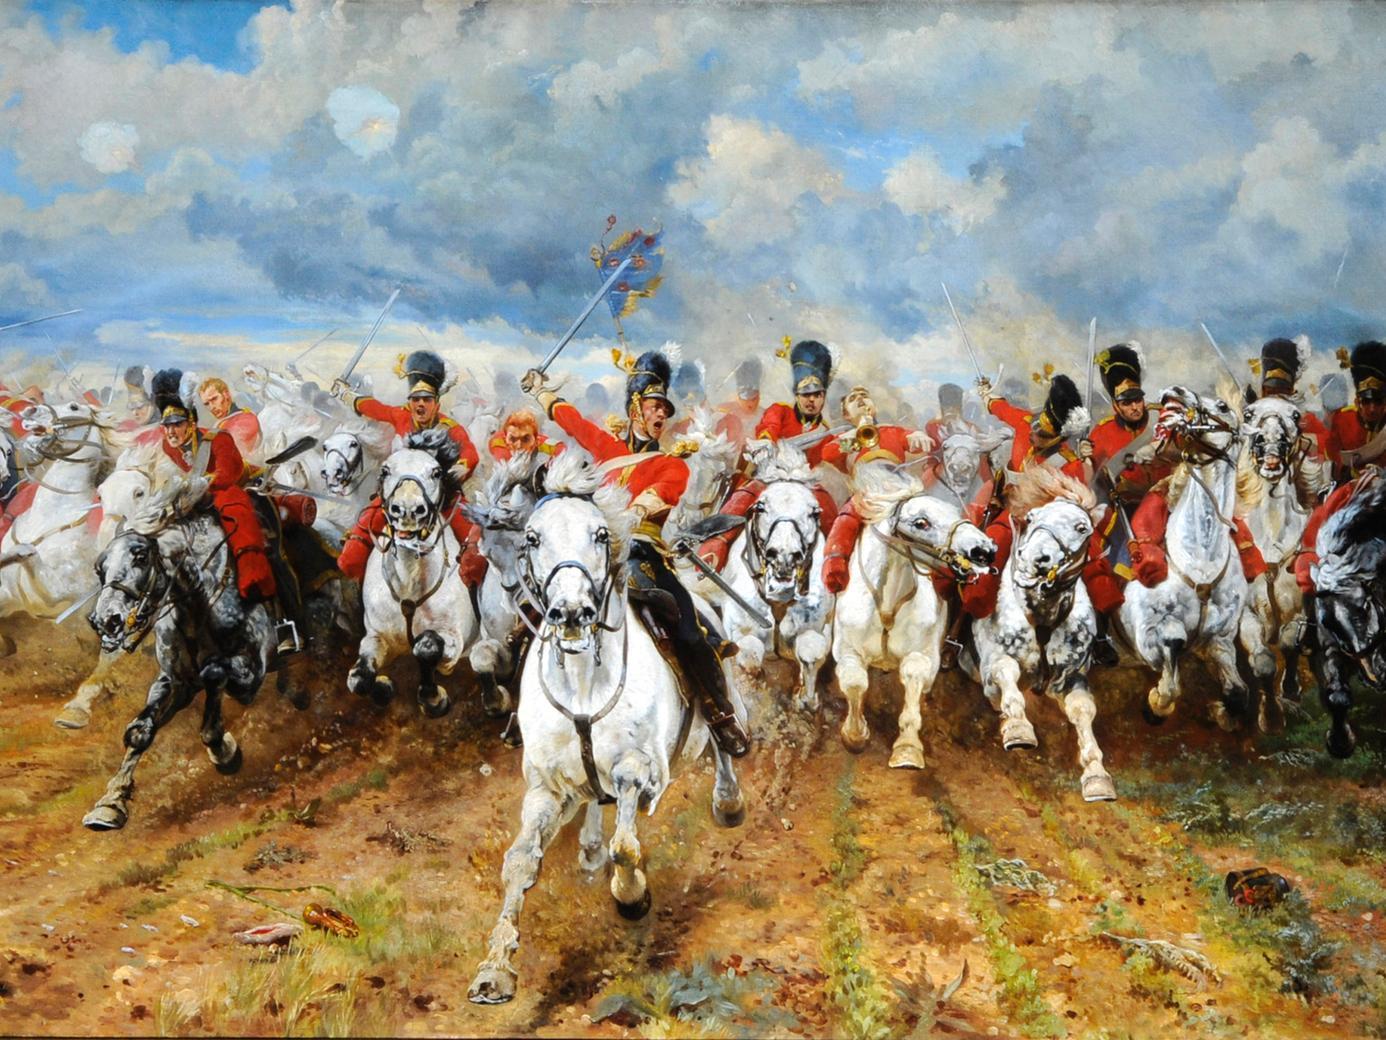 Purchased by Colonel T. W. Harding who stood for election to the council in order to facilitate the original opening of Leeds Art Gallery back in 1888. It depicts the gallant charge of The Scots Greys at the Battle of Waterloo.